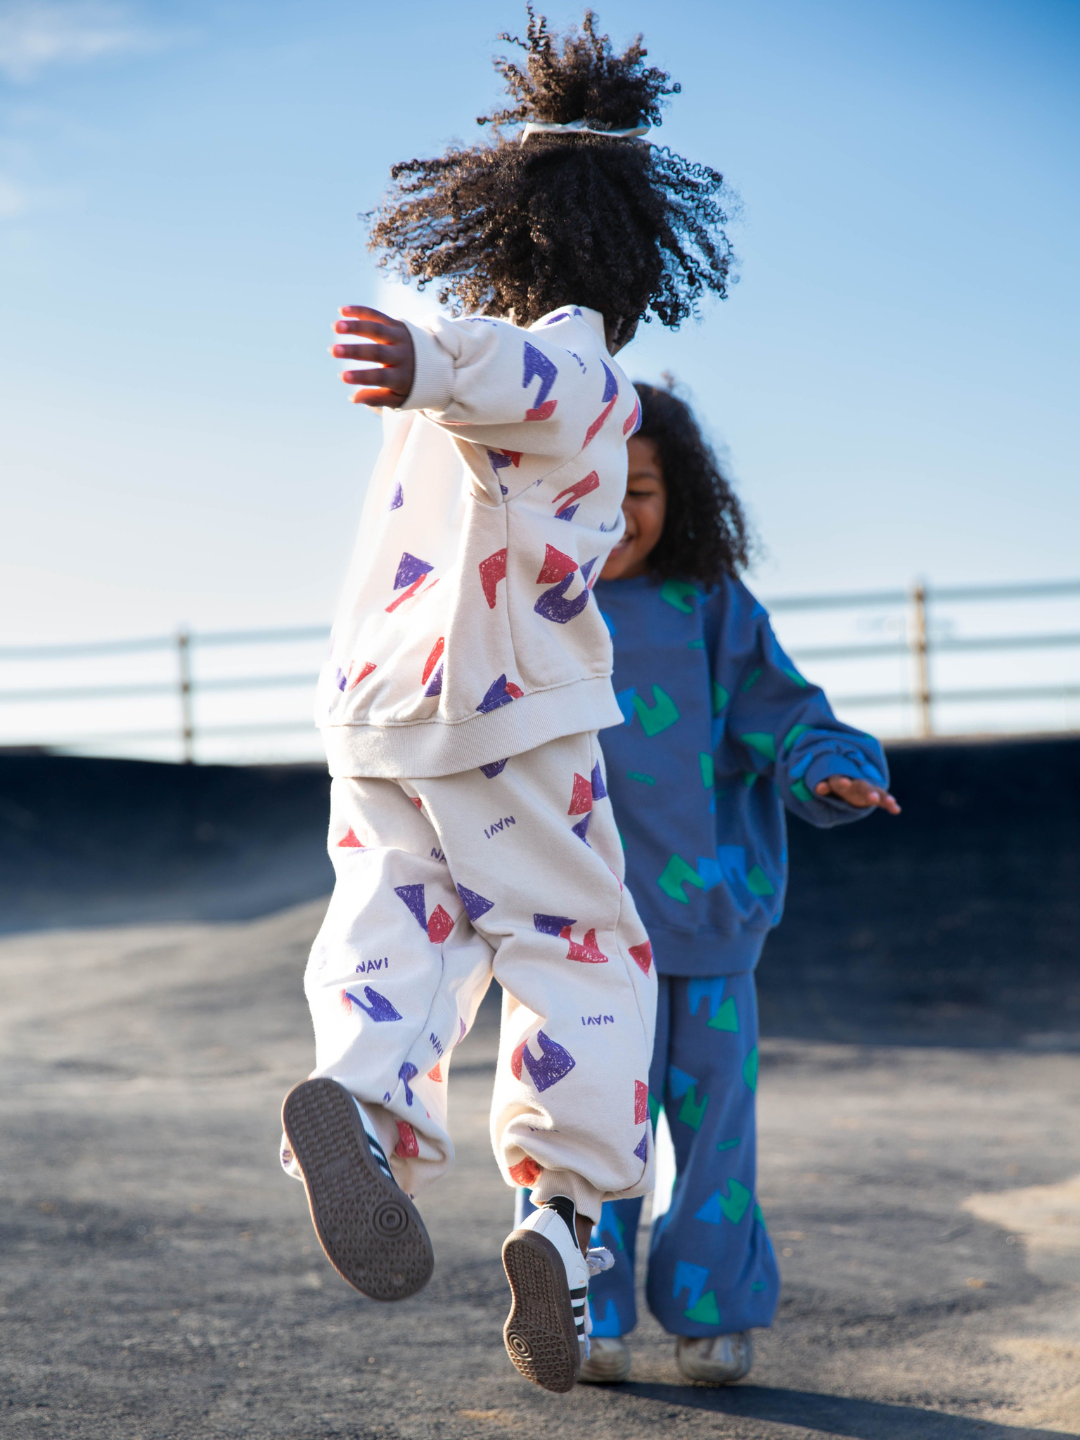 Oatmeal | Child wearing beige sweatpants with an all over pattern of red and purple shapes and the brand name Navi, with matching crewneck sweatshirt. She is jumping facing away from camera, at an outdoor skate park with blue sky. Another child is behind her in the same outfit in blue.